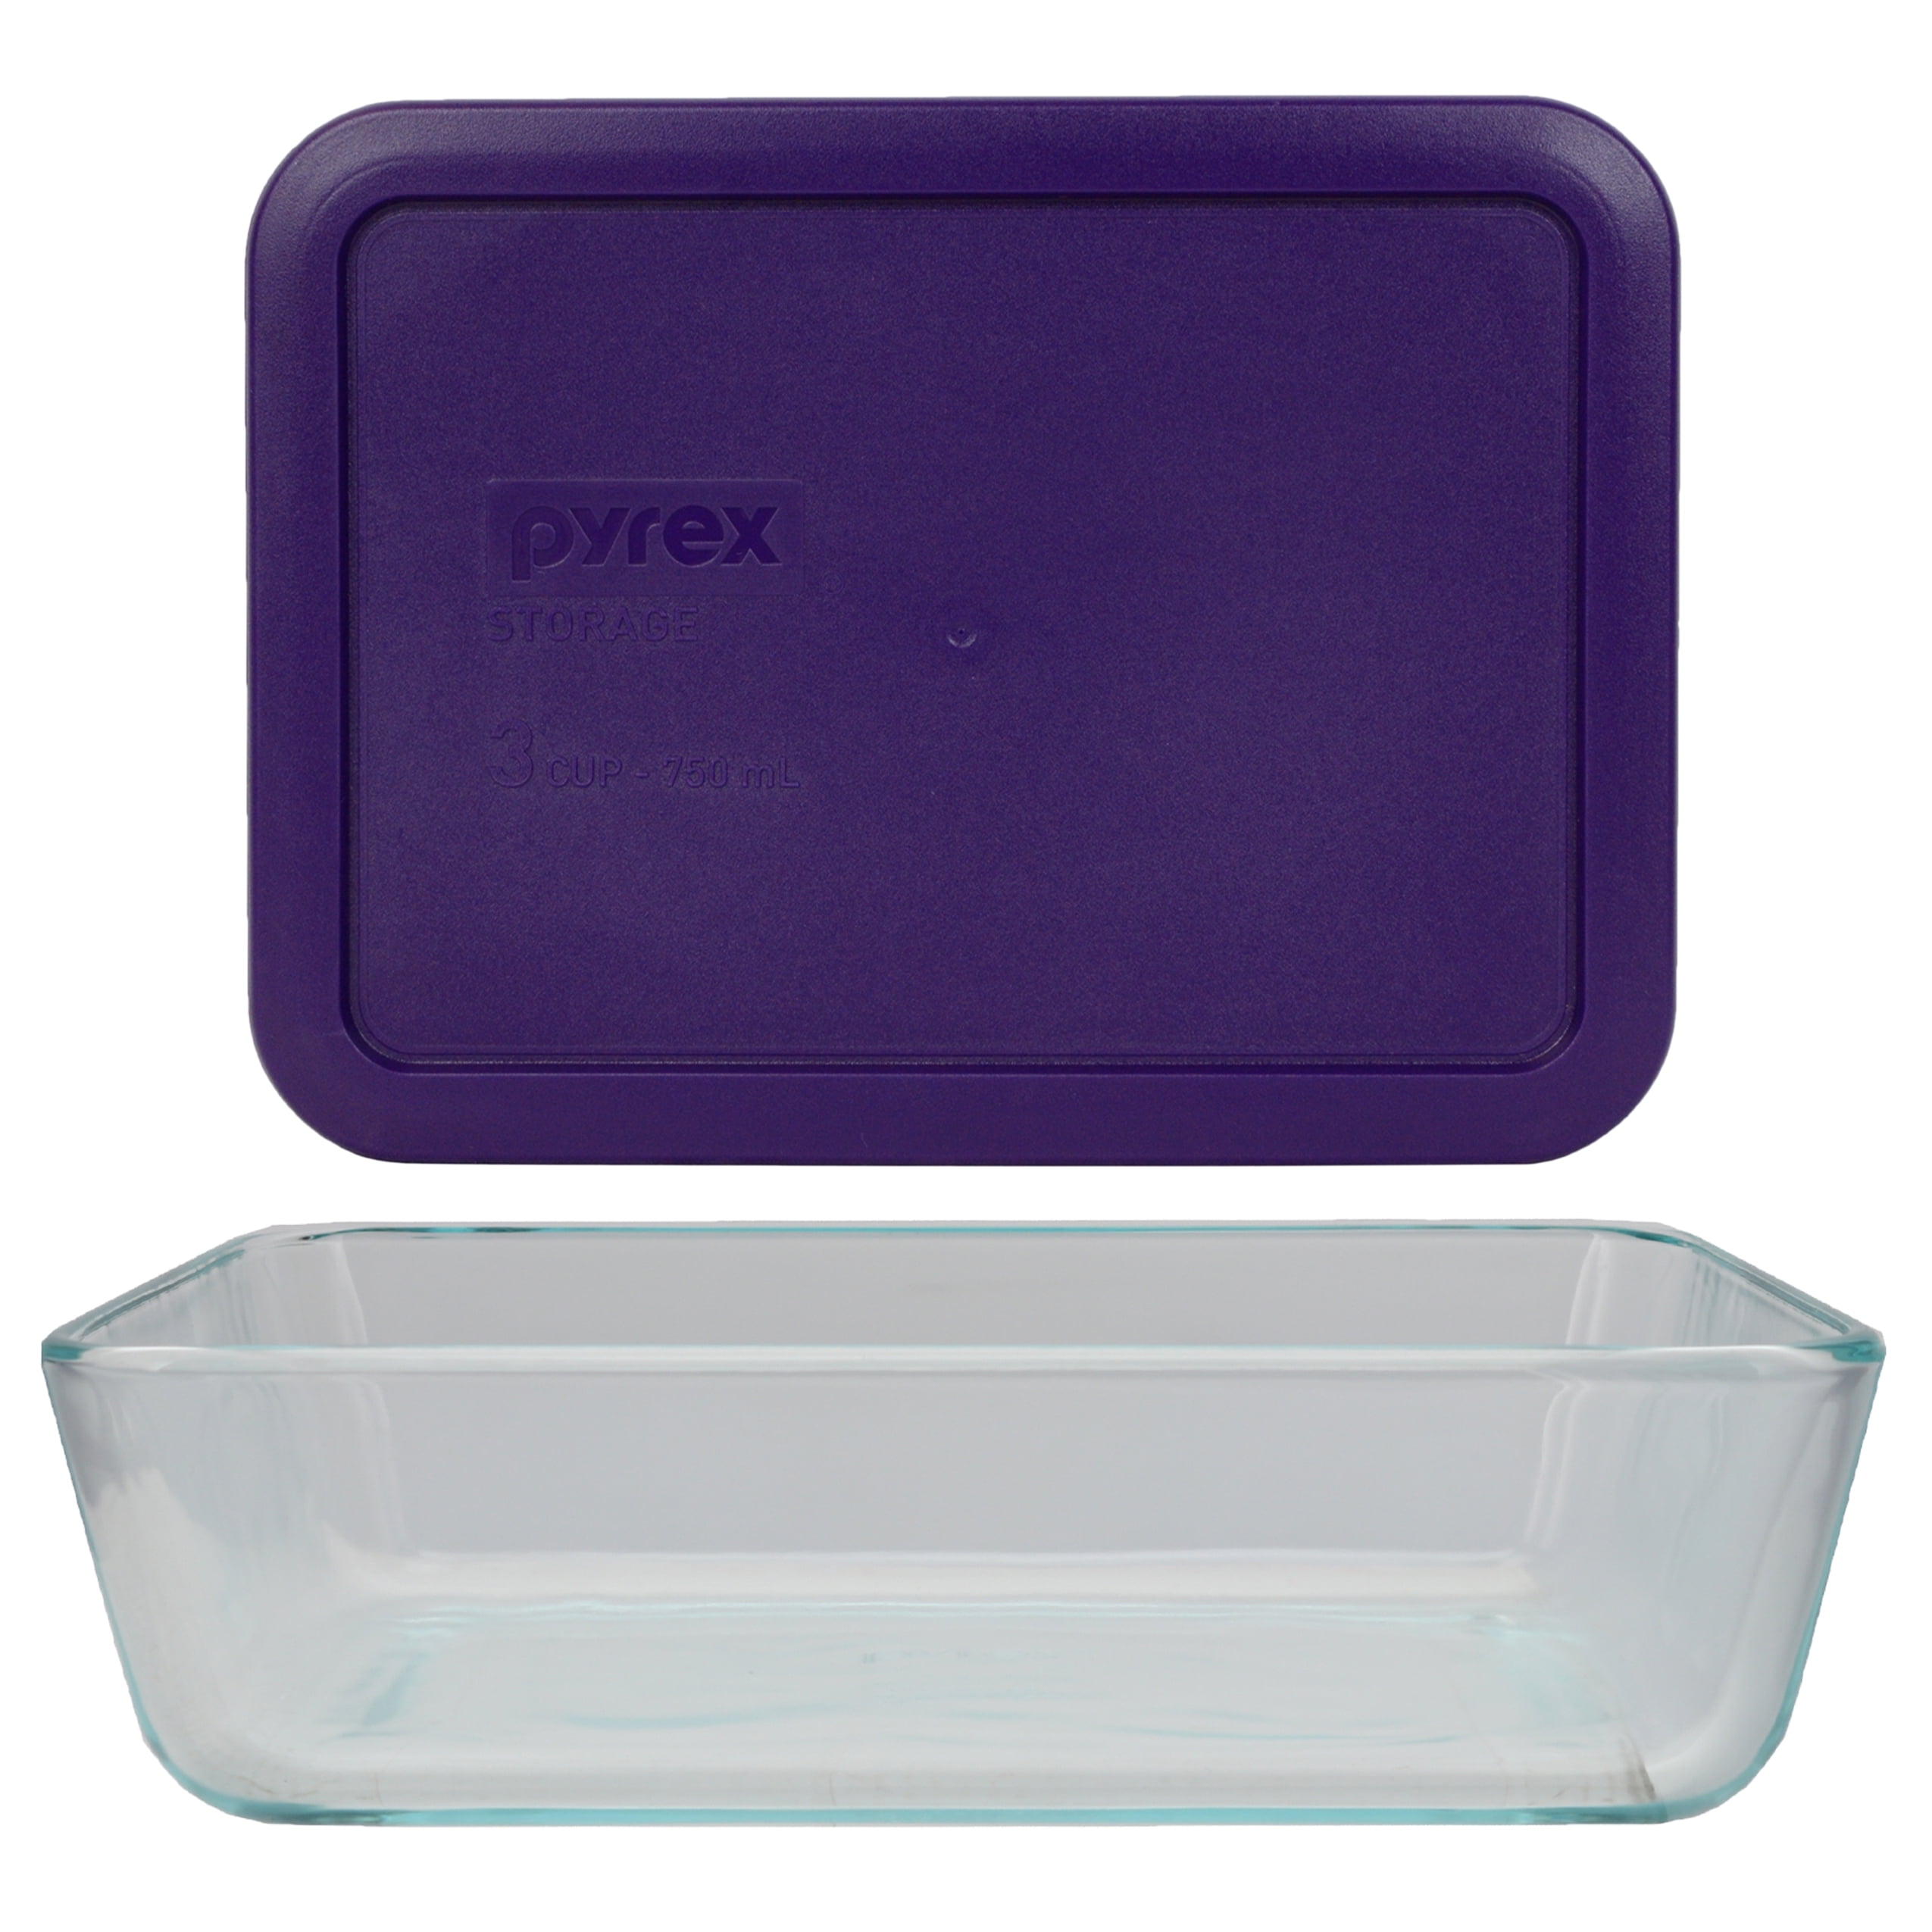 Pyrex Rectangular 3 Cup (750ml) Plastic Storage Cover (2, Green)